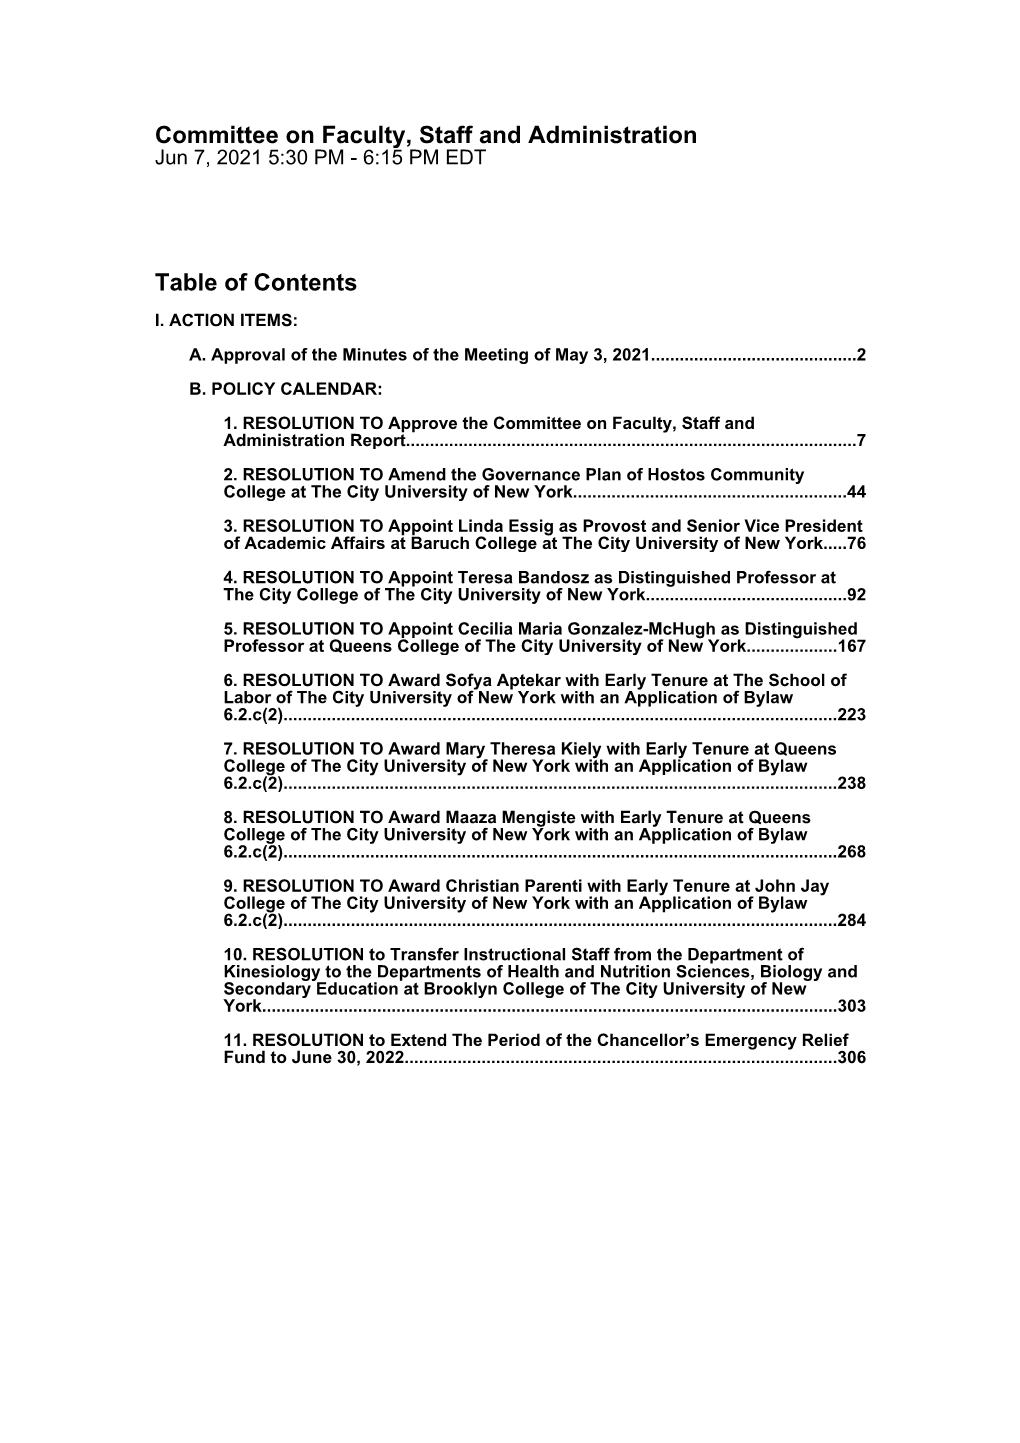 Committee on Faculty, Staff and Administration Table of Contents